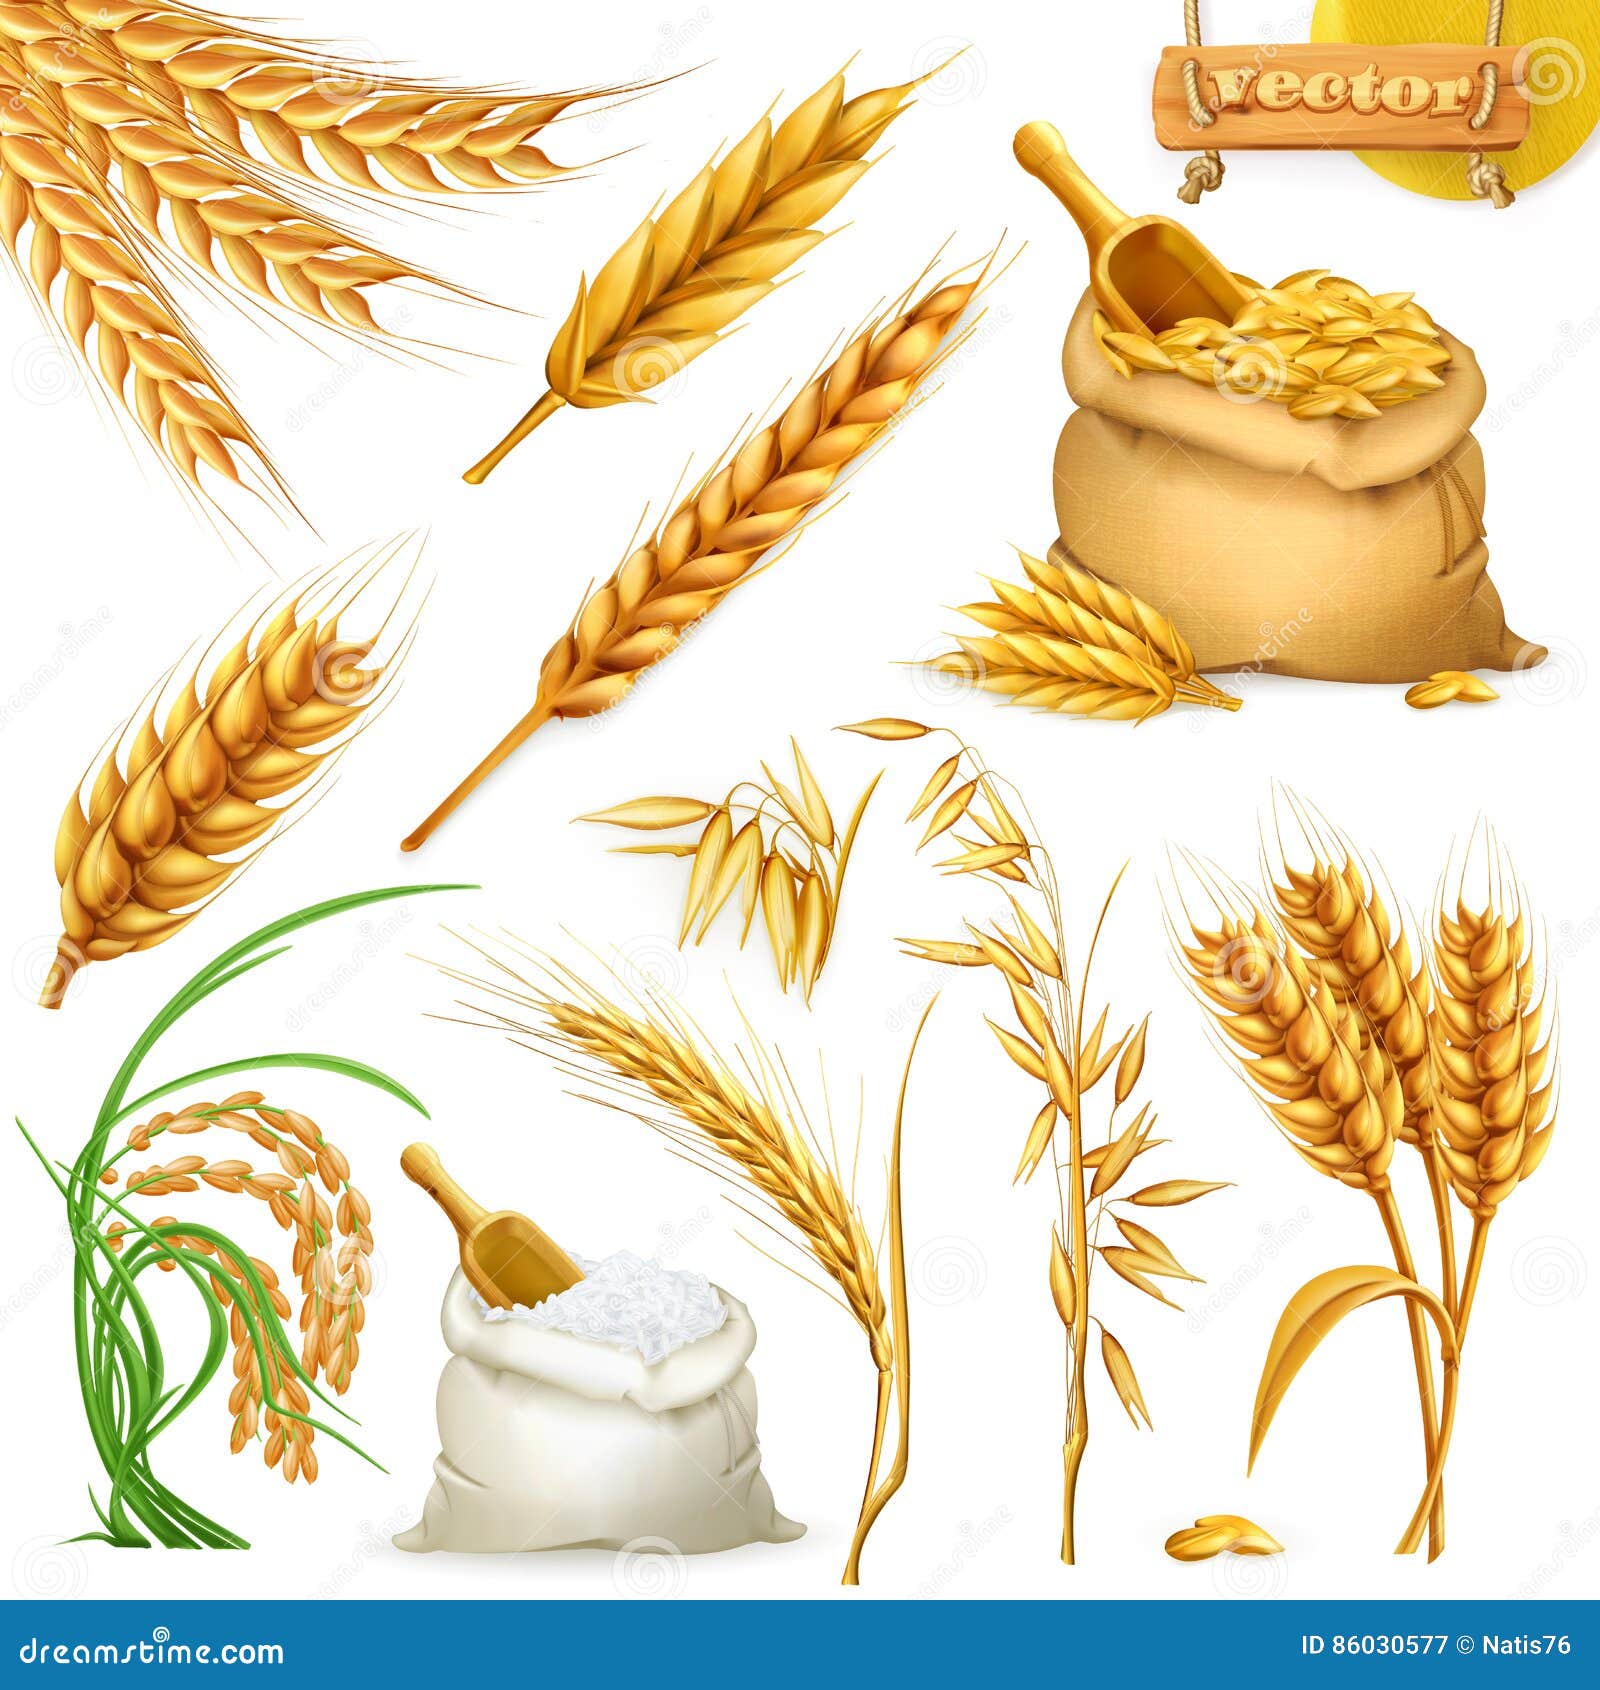 wheat, barley, oat and rice. cereals icon  set